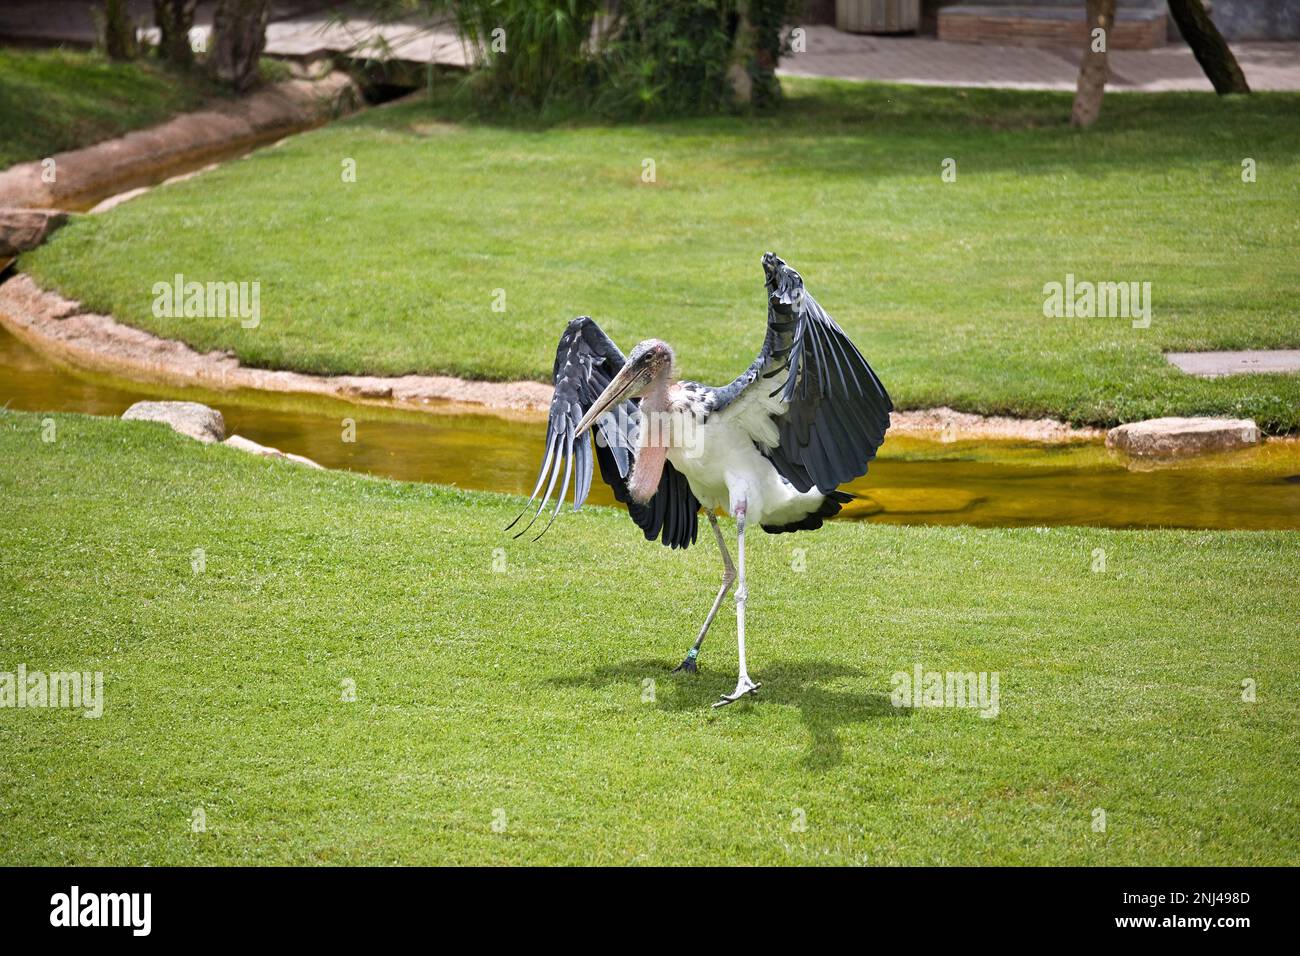 Full body shot of an African marabou that has just landed on a grassy landscape with a small river. Stock Photo